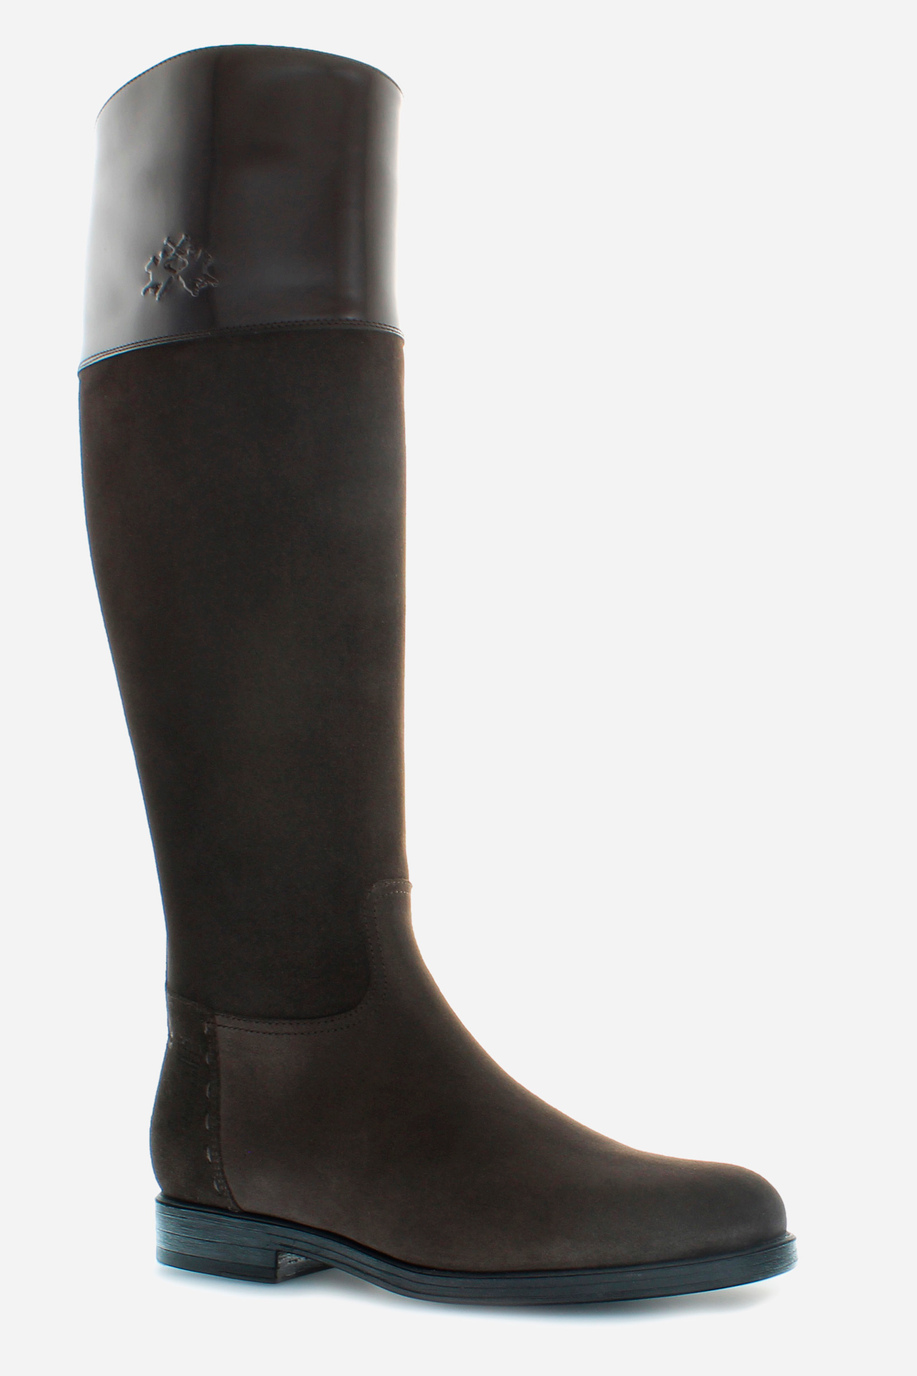 Women’s equestrian style boot in suede - Accessories for her | La Martina - Official Online Shop